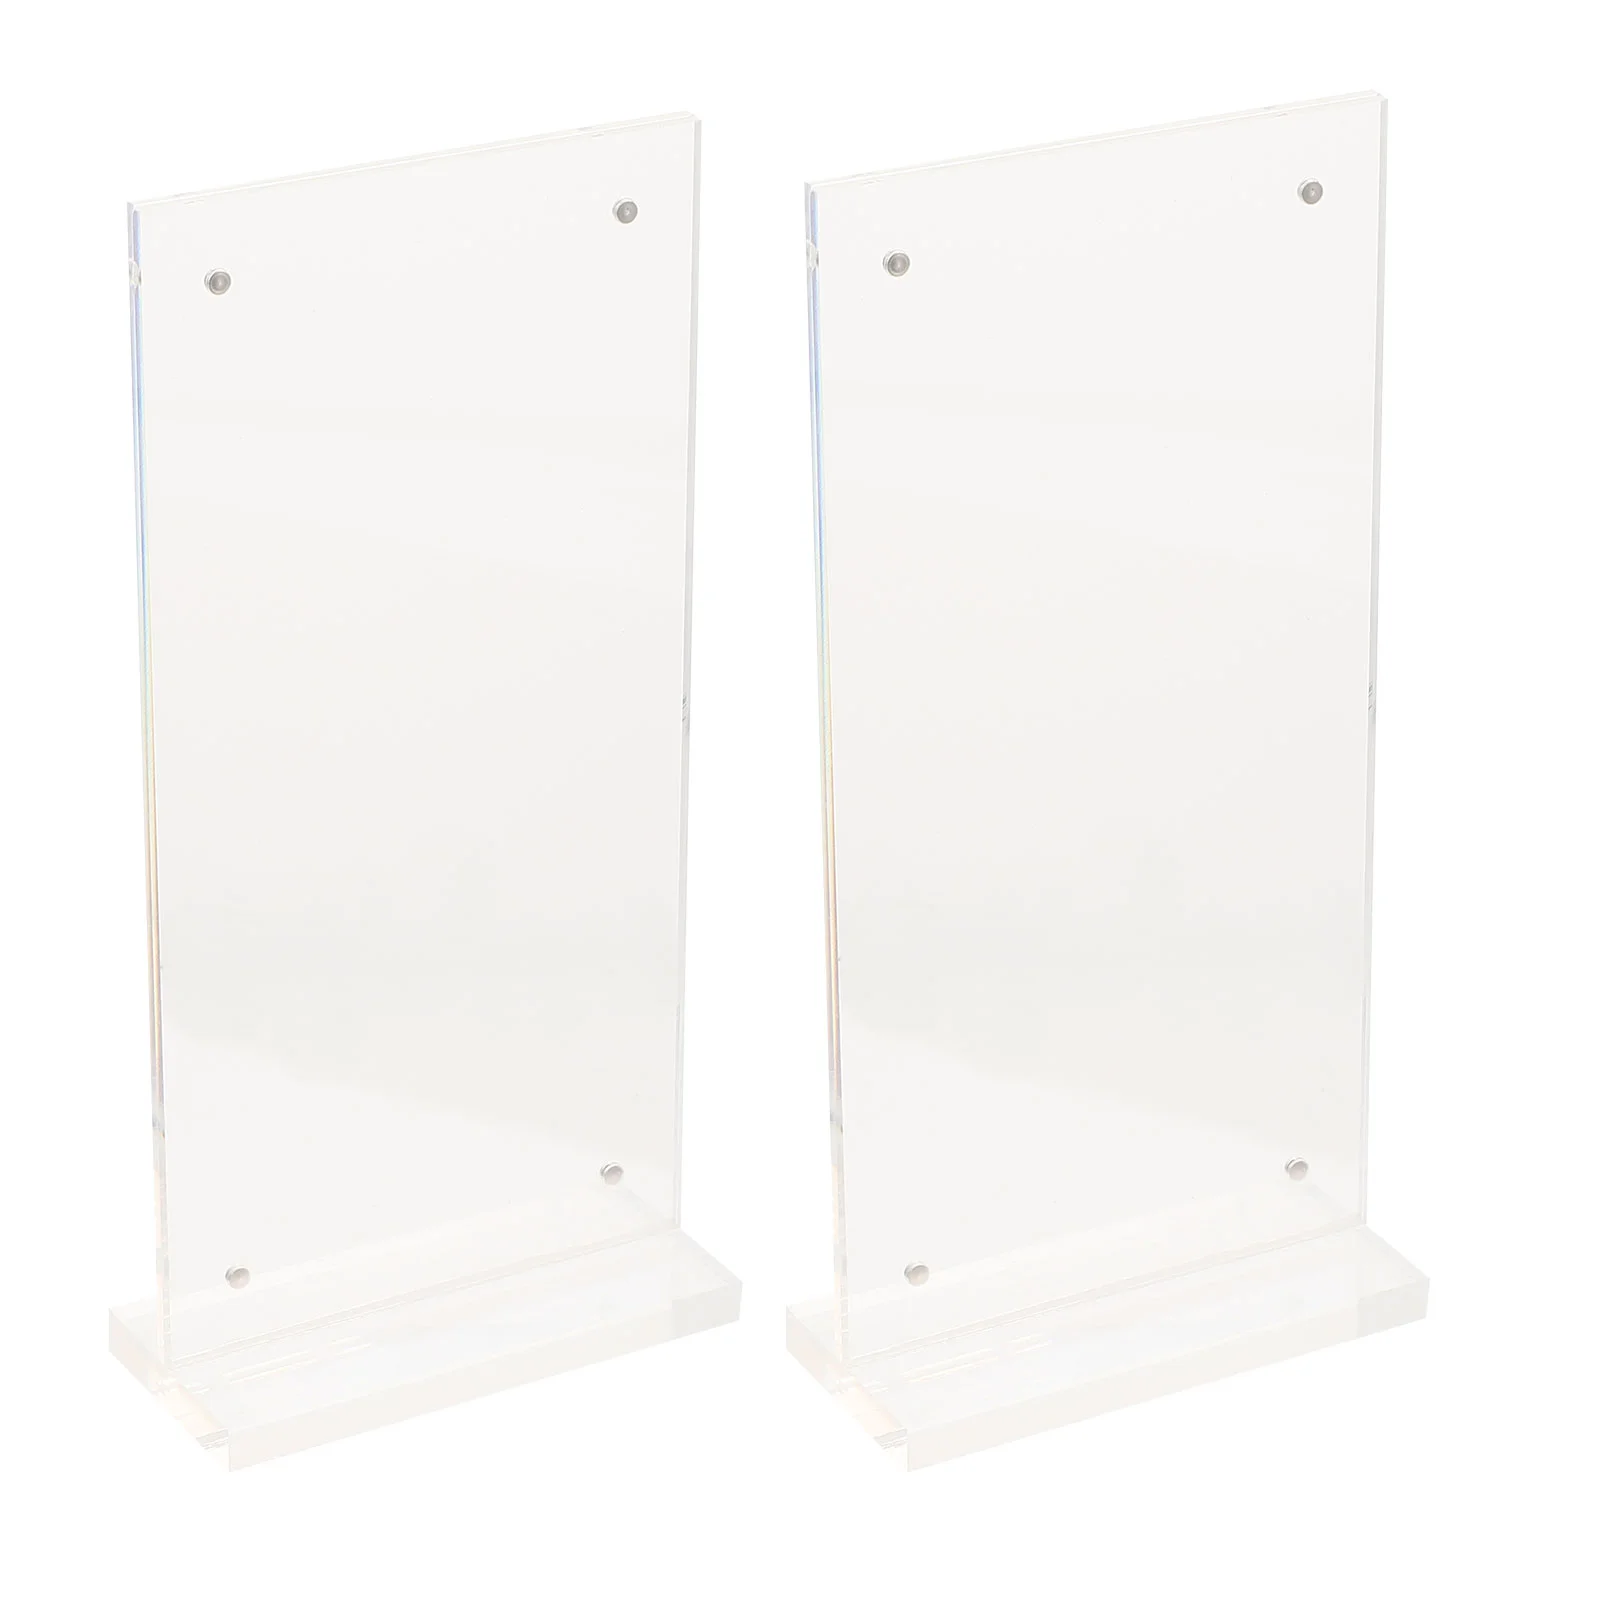 2Pcs Magnetic Acrylic Display Stand Table Menu Holder Clear Signs Centerpiece Decoration clear 4 tier acrylic riser step display jewelry stand shelf decoration toy organizer small stone collection exhibition show